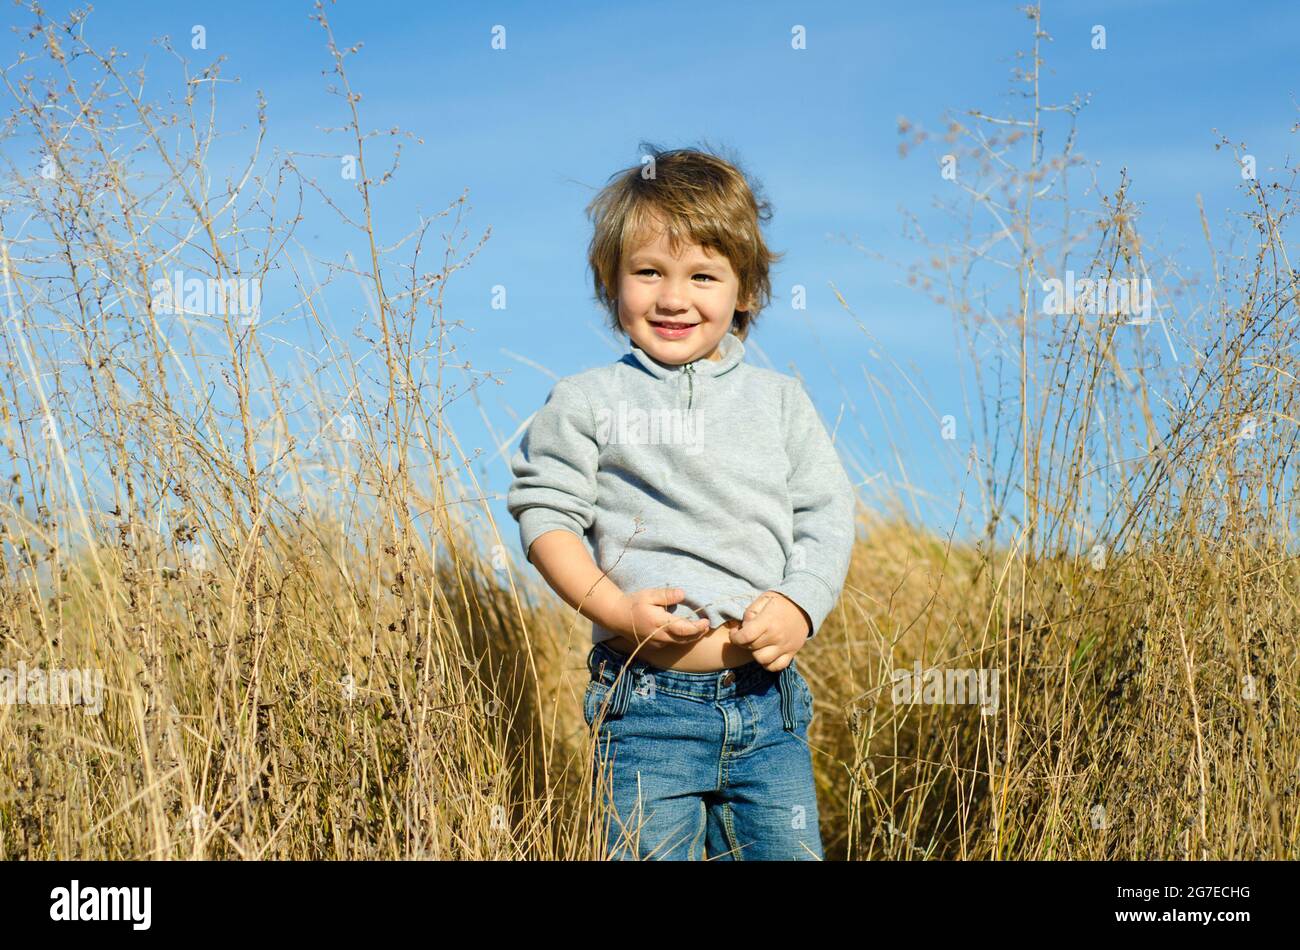 smiling little boy on a rural field Stock Photo